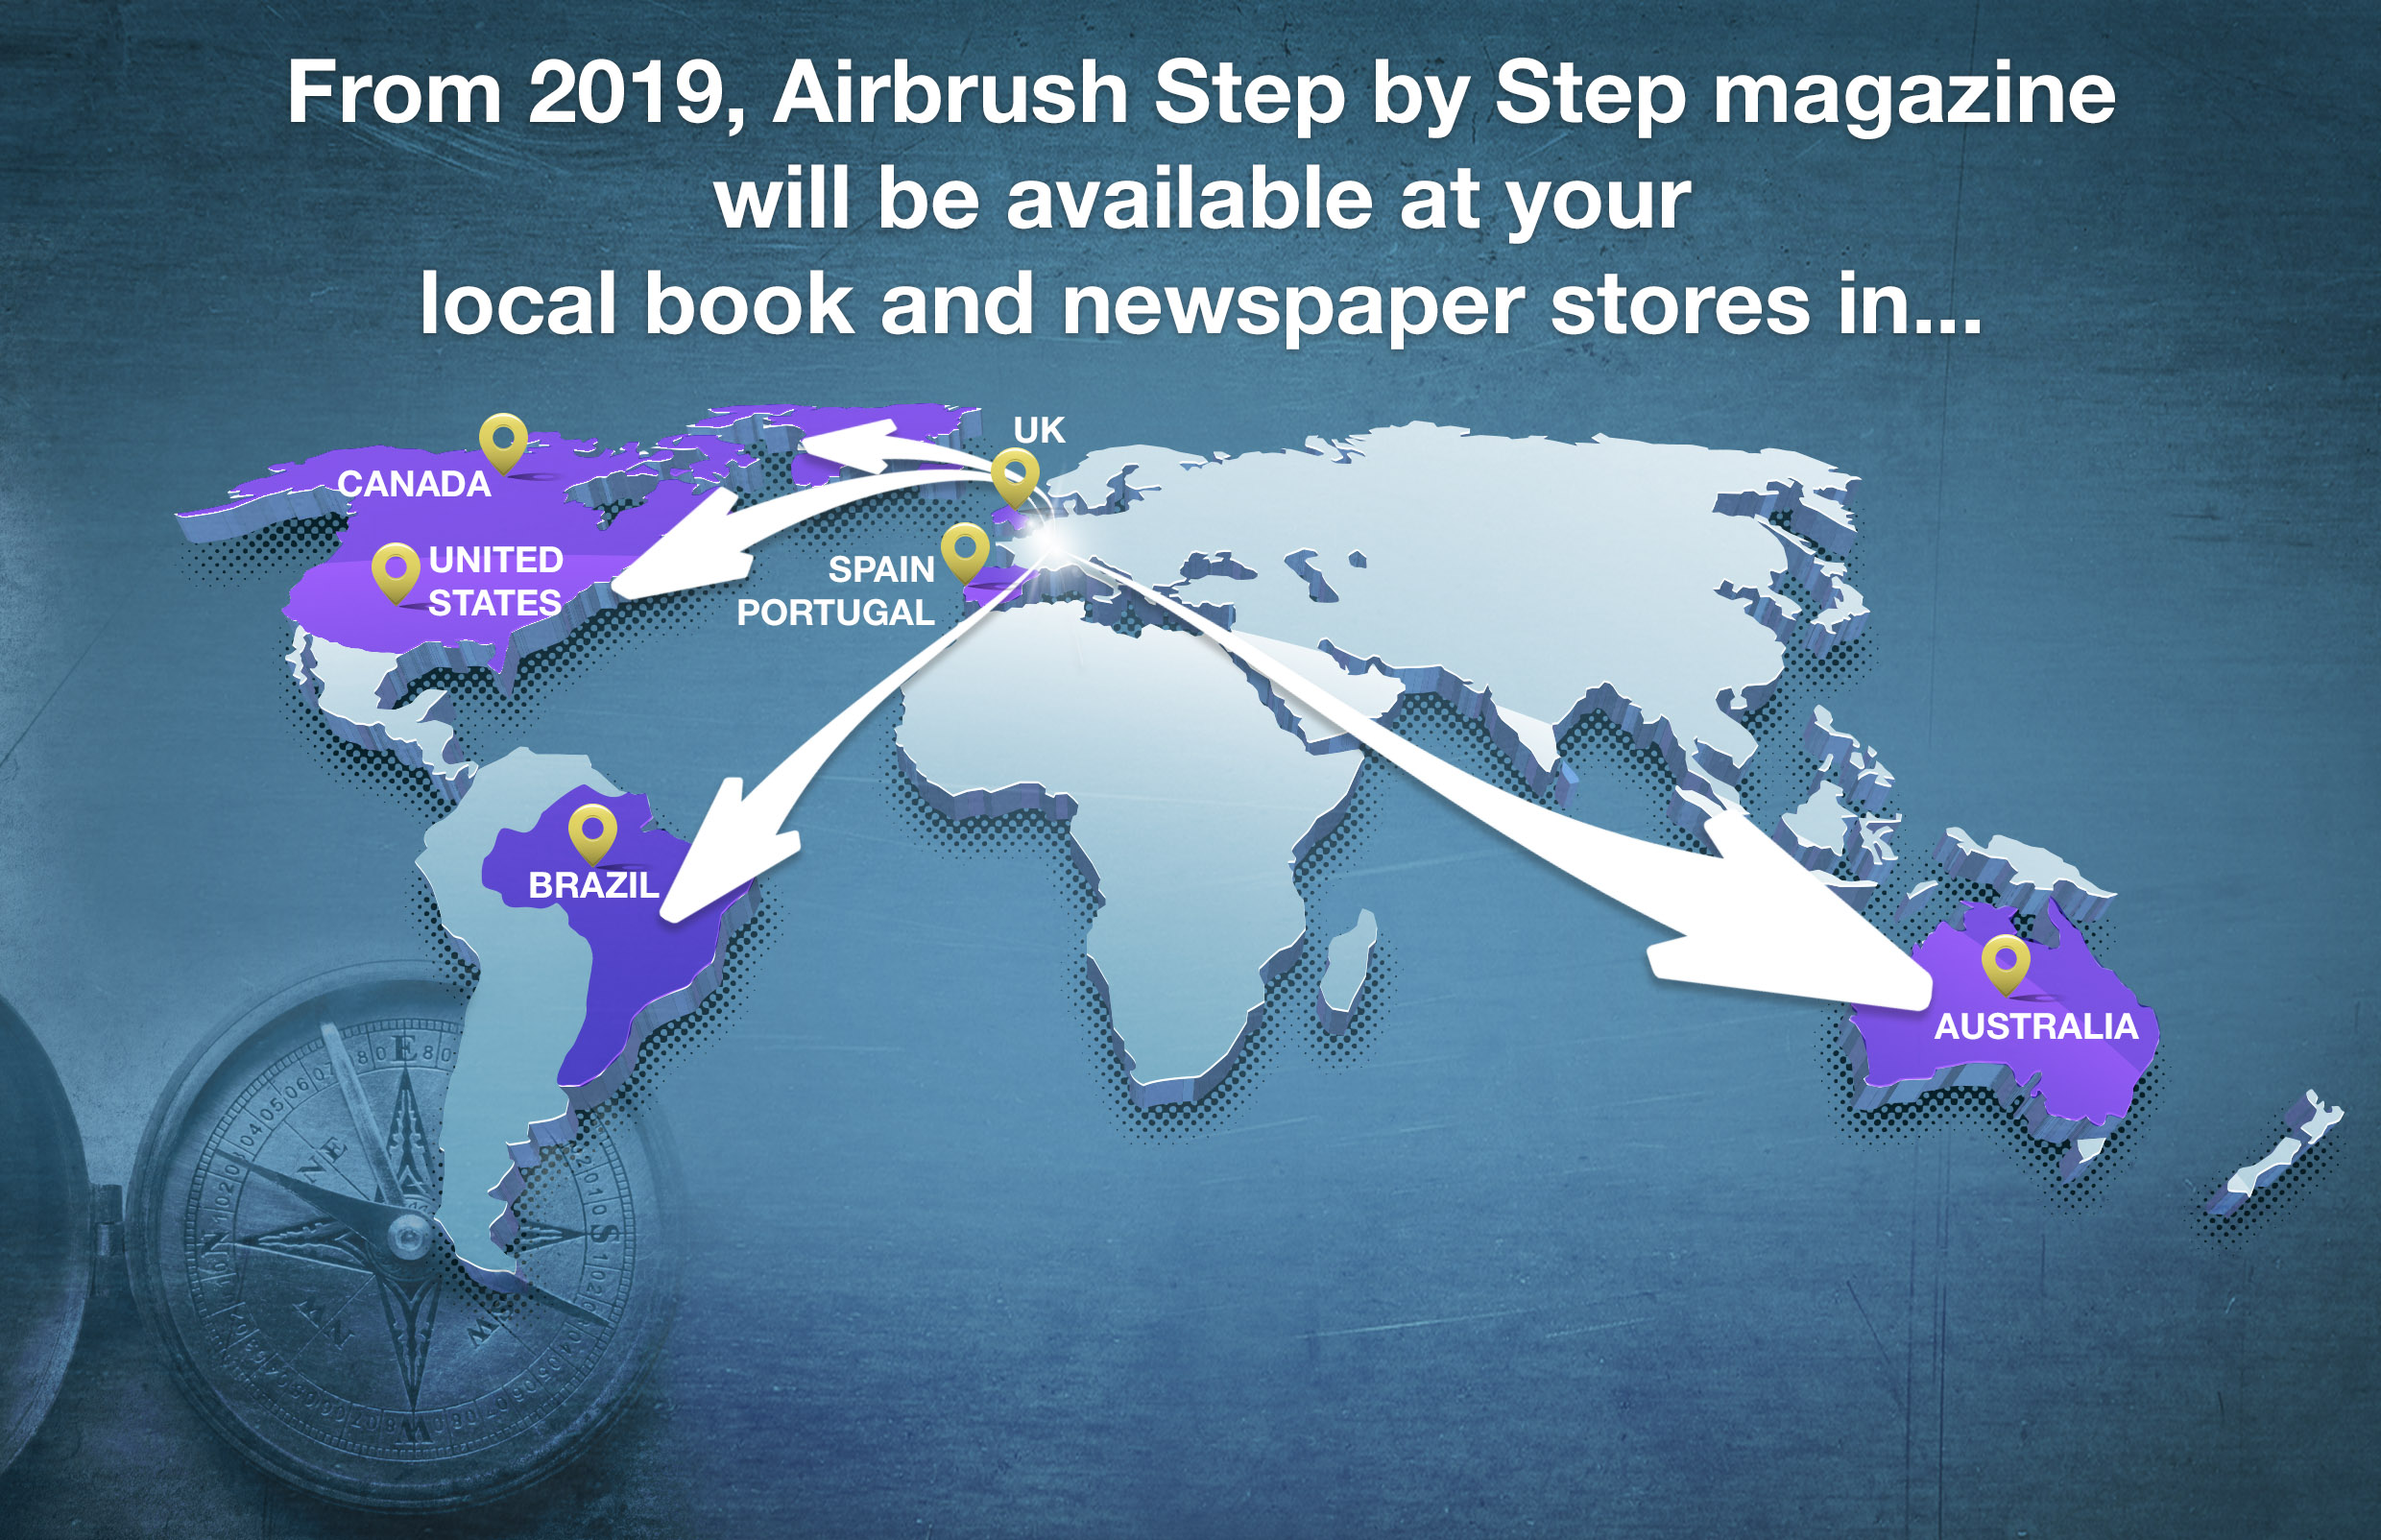 Airbrush Step by Step magazine available in book stores in 7 countries from 2019